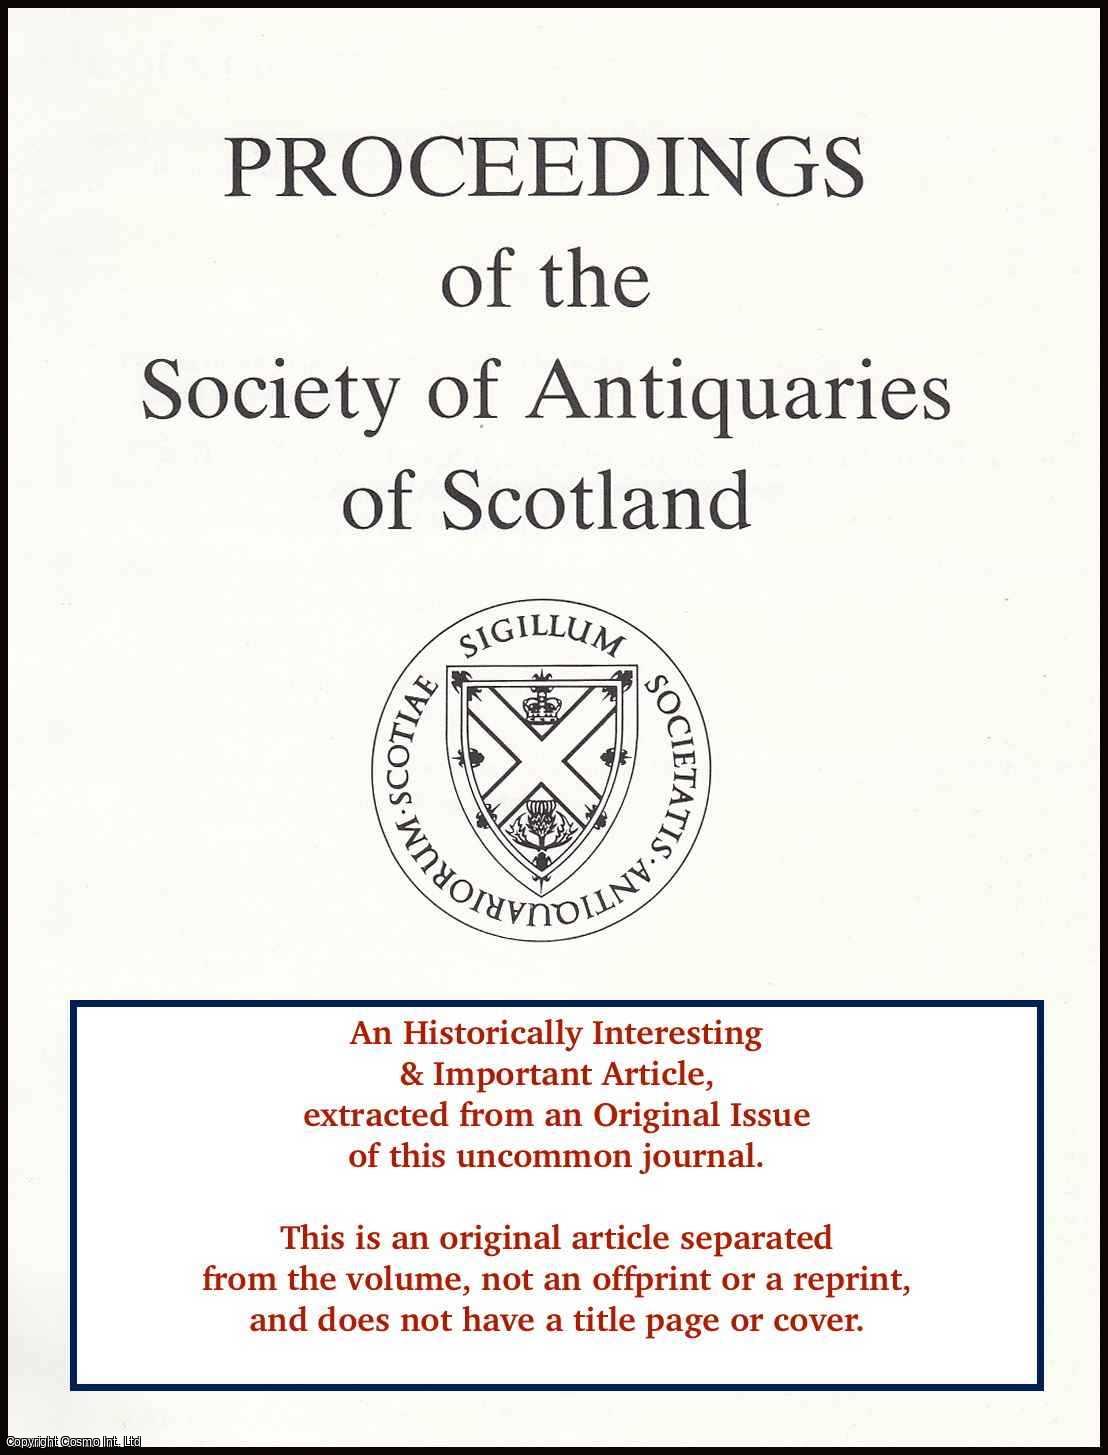 John Abercromby - A Tanged Dagger or Spear-Head from Crawford Priory, Fife. An original article from the Proceedings of the Society of Antiquaries of Scotland, 1893-94.